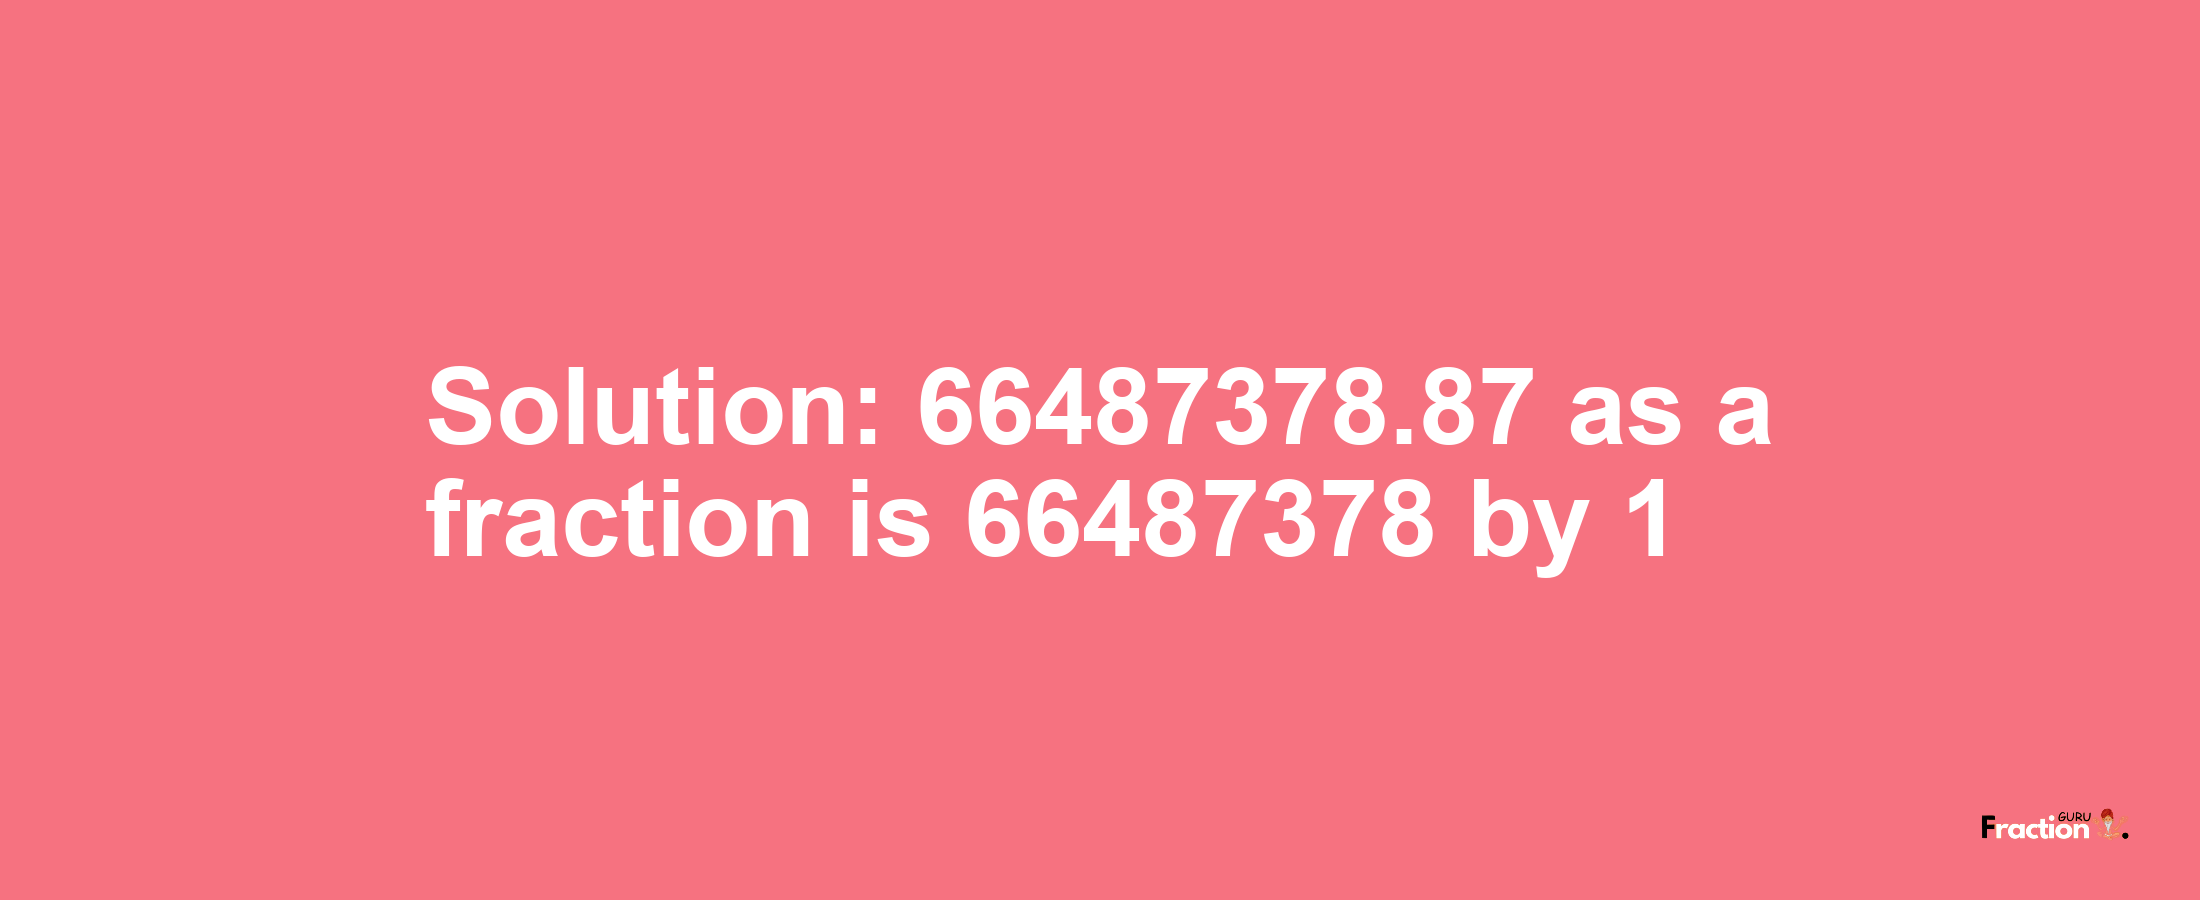 Solution:66487378.87 as a fraction is 66487378/1